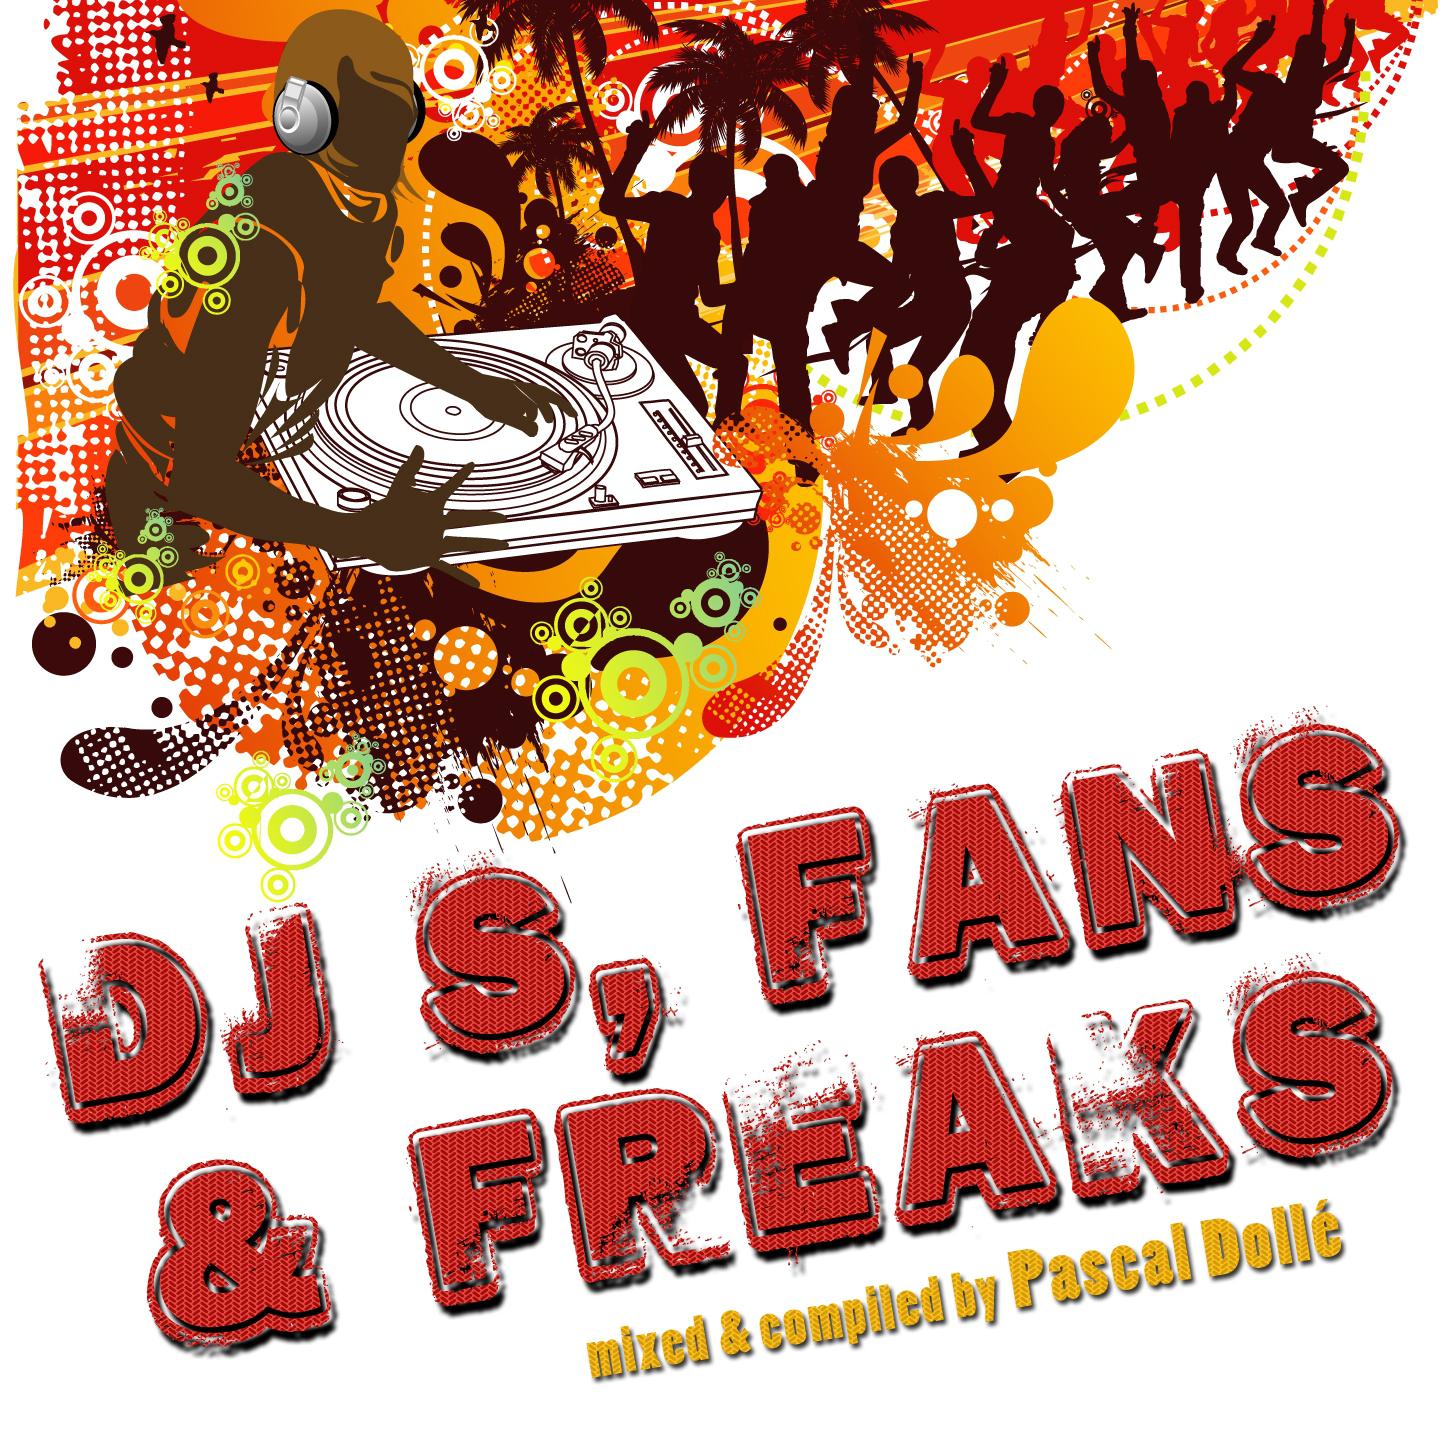 Djs, Fans  Freaks, Vol. 1  Presented By Pascal Dolle